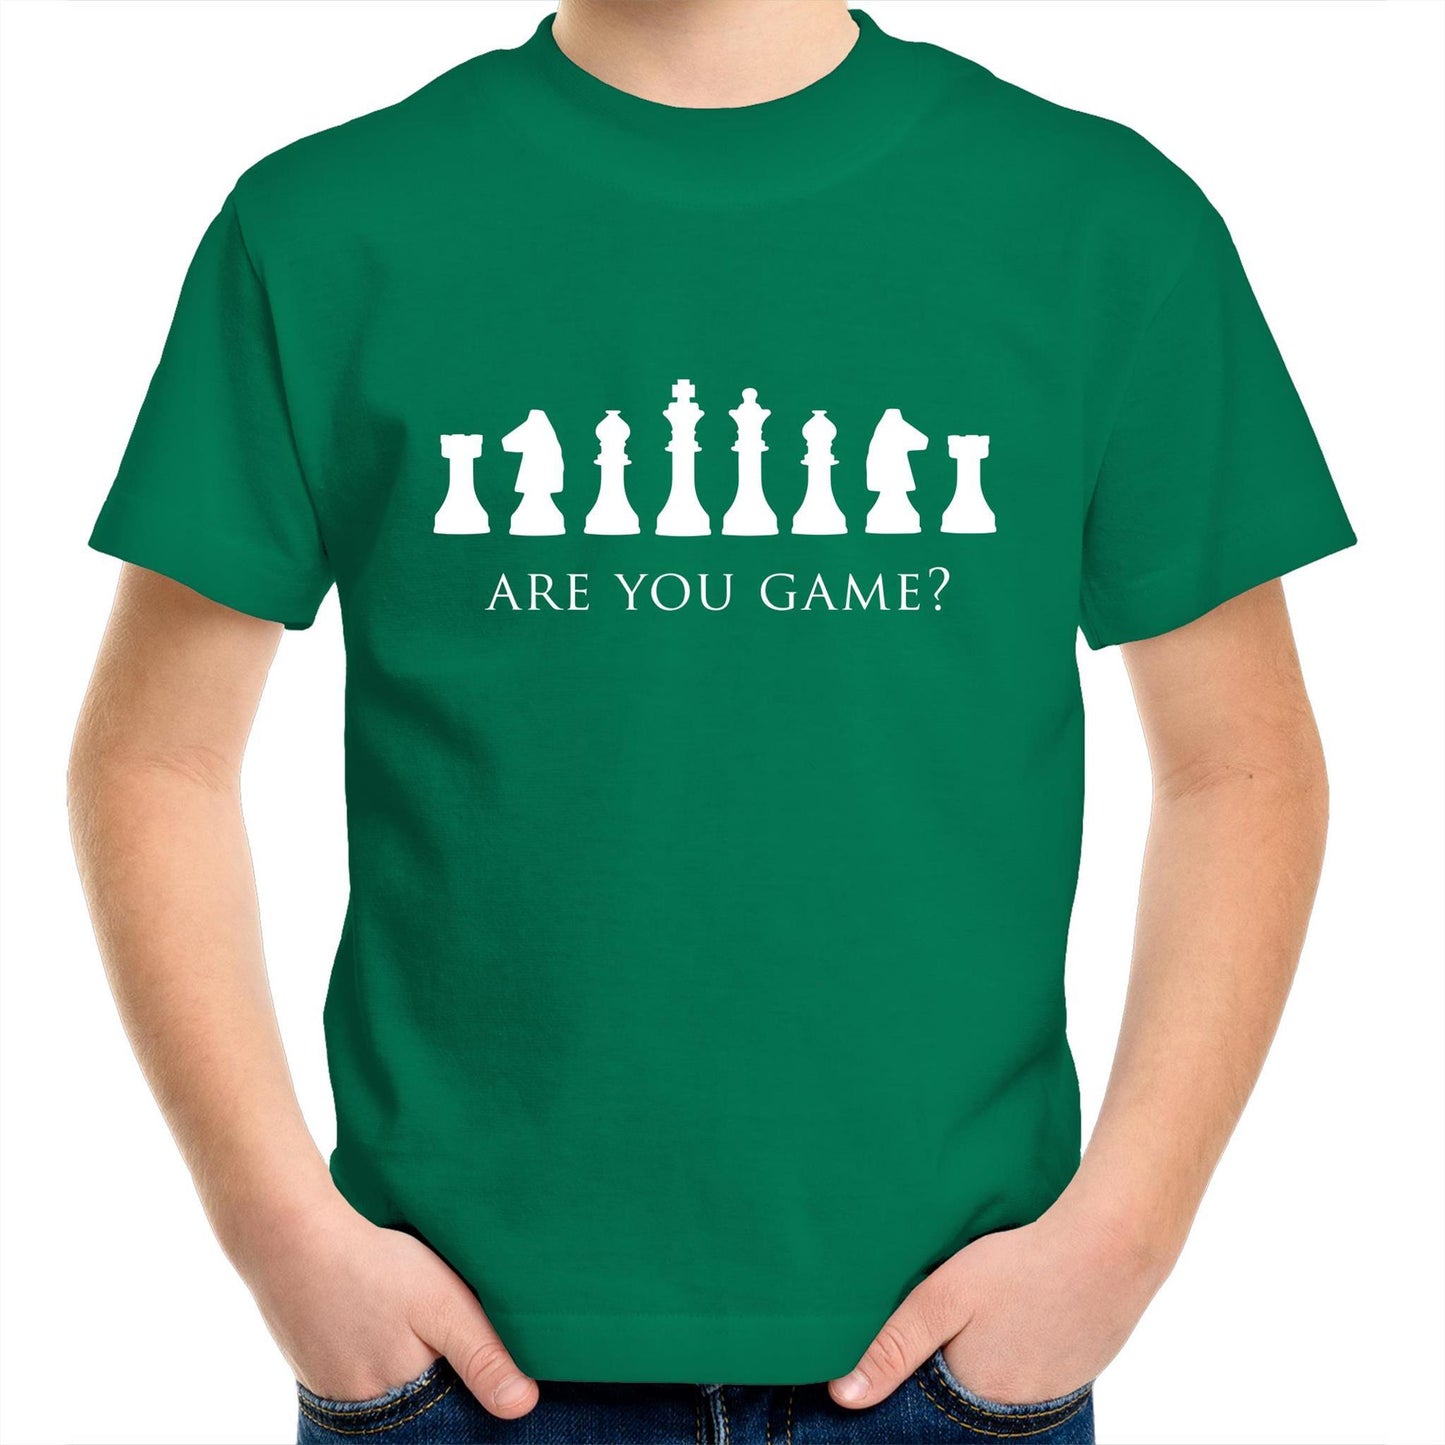 Are You Game - Kids Youth Crew T-shirt Kelly Green Kids Youth T-shirt Chess